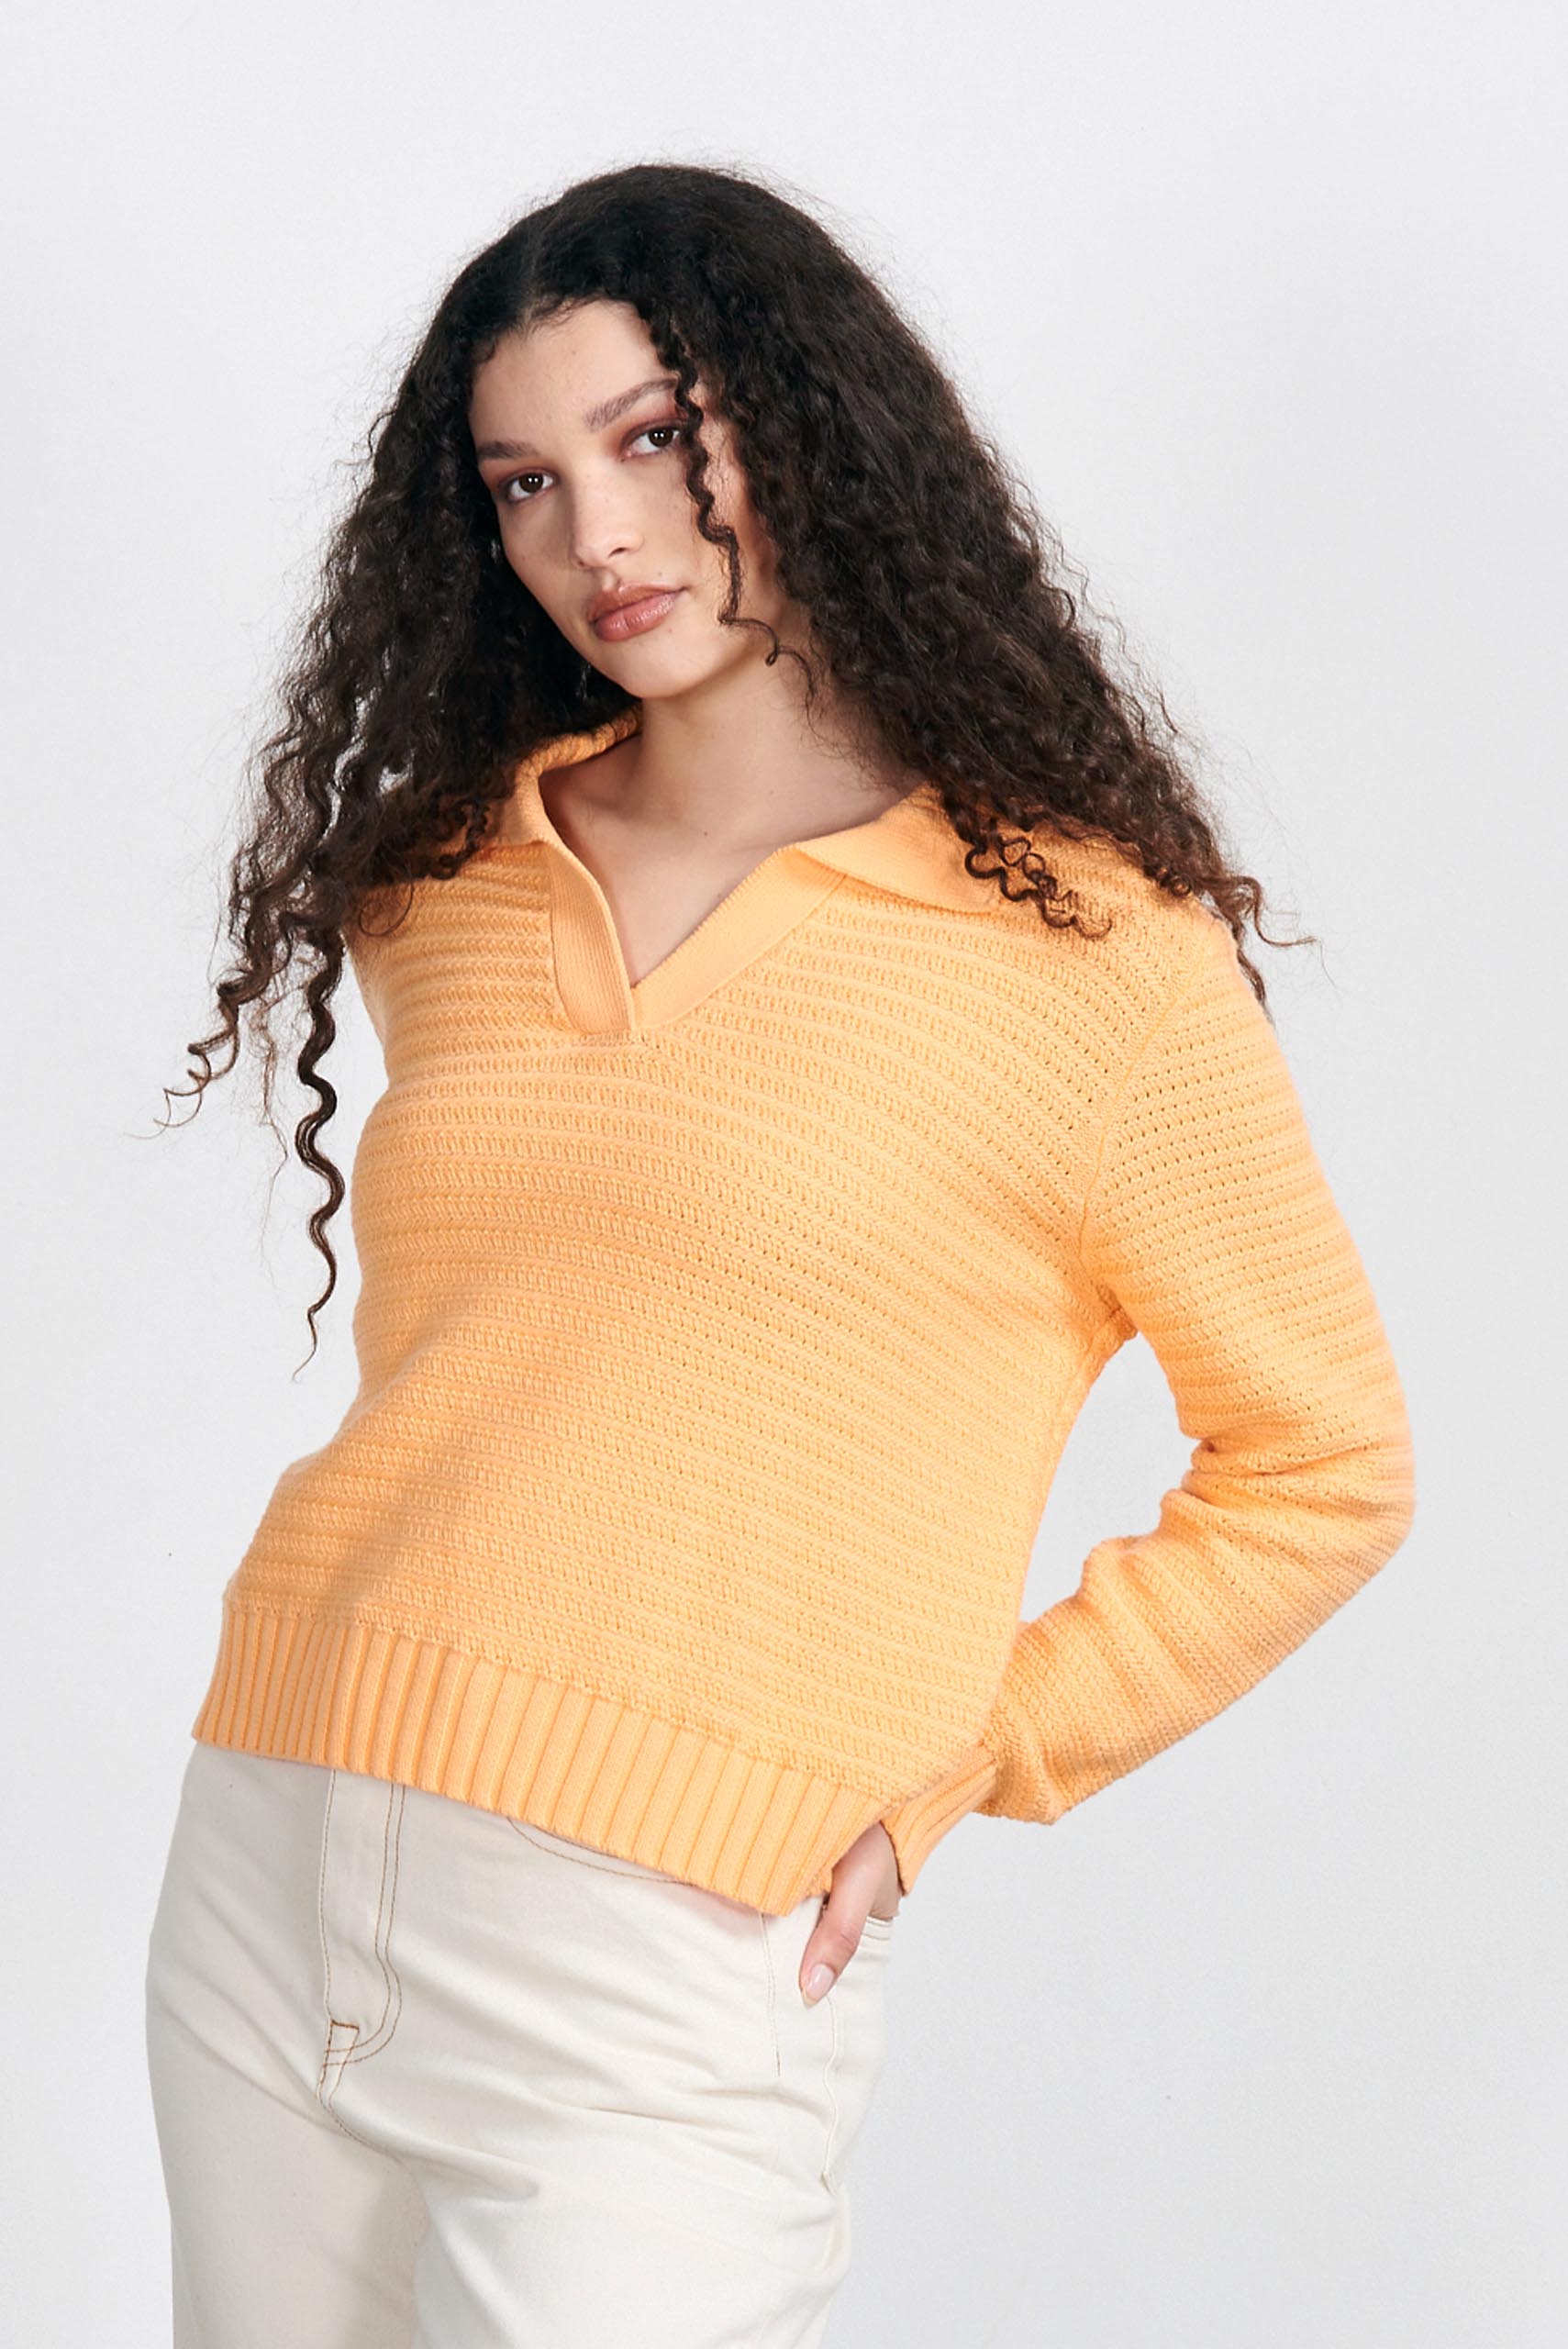 Brown haired female model wearing Jumper1234 Apricot cotton jumper with a collar in a fabulous all over herringbone stitch